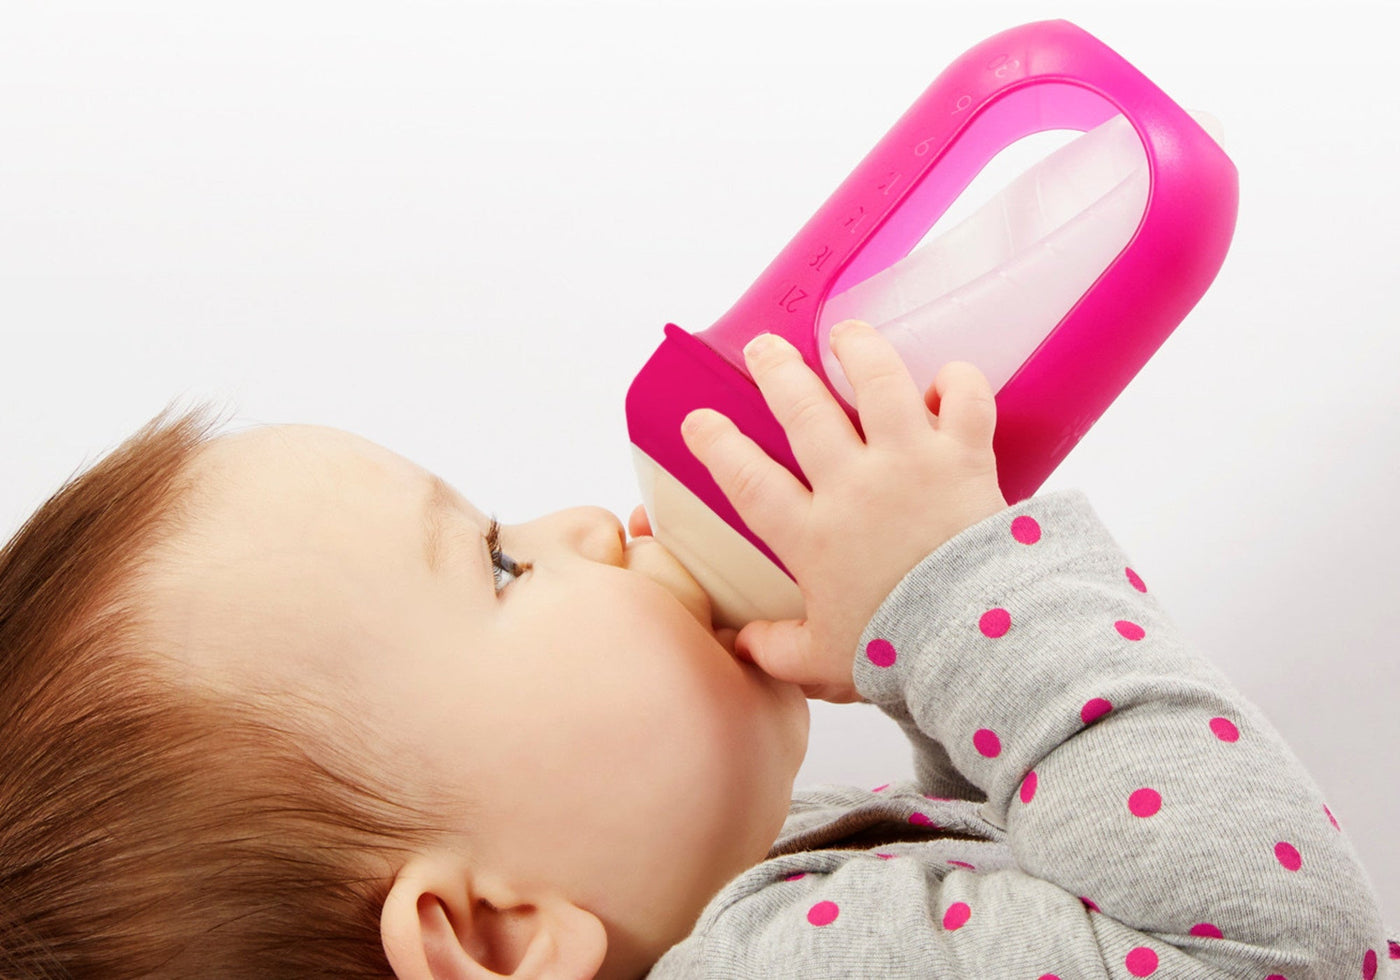 Baby drinking from a pink baby bottle